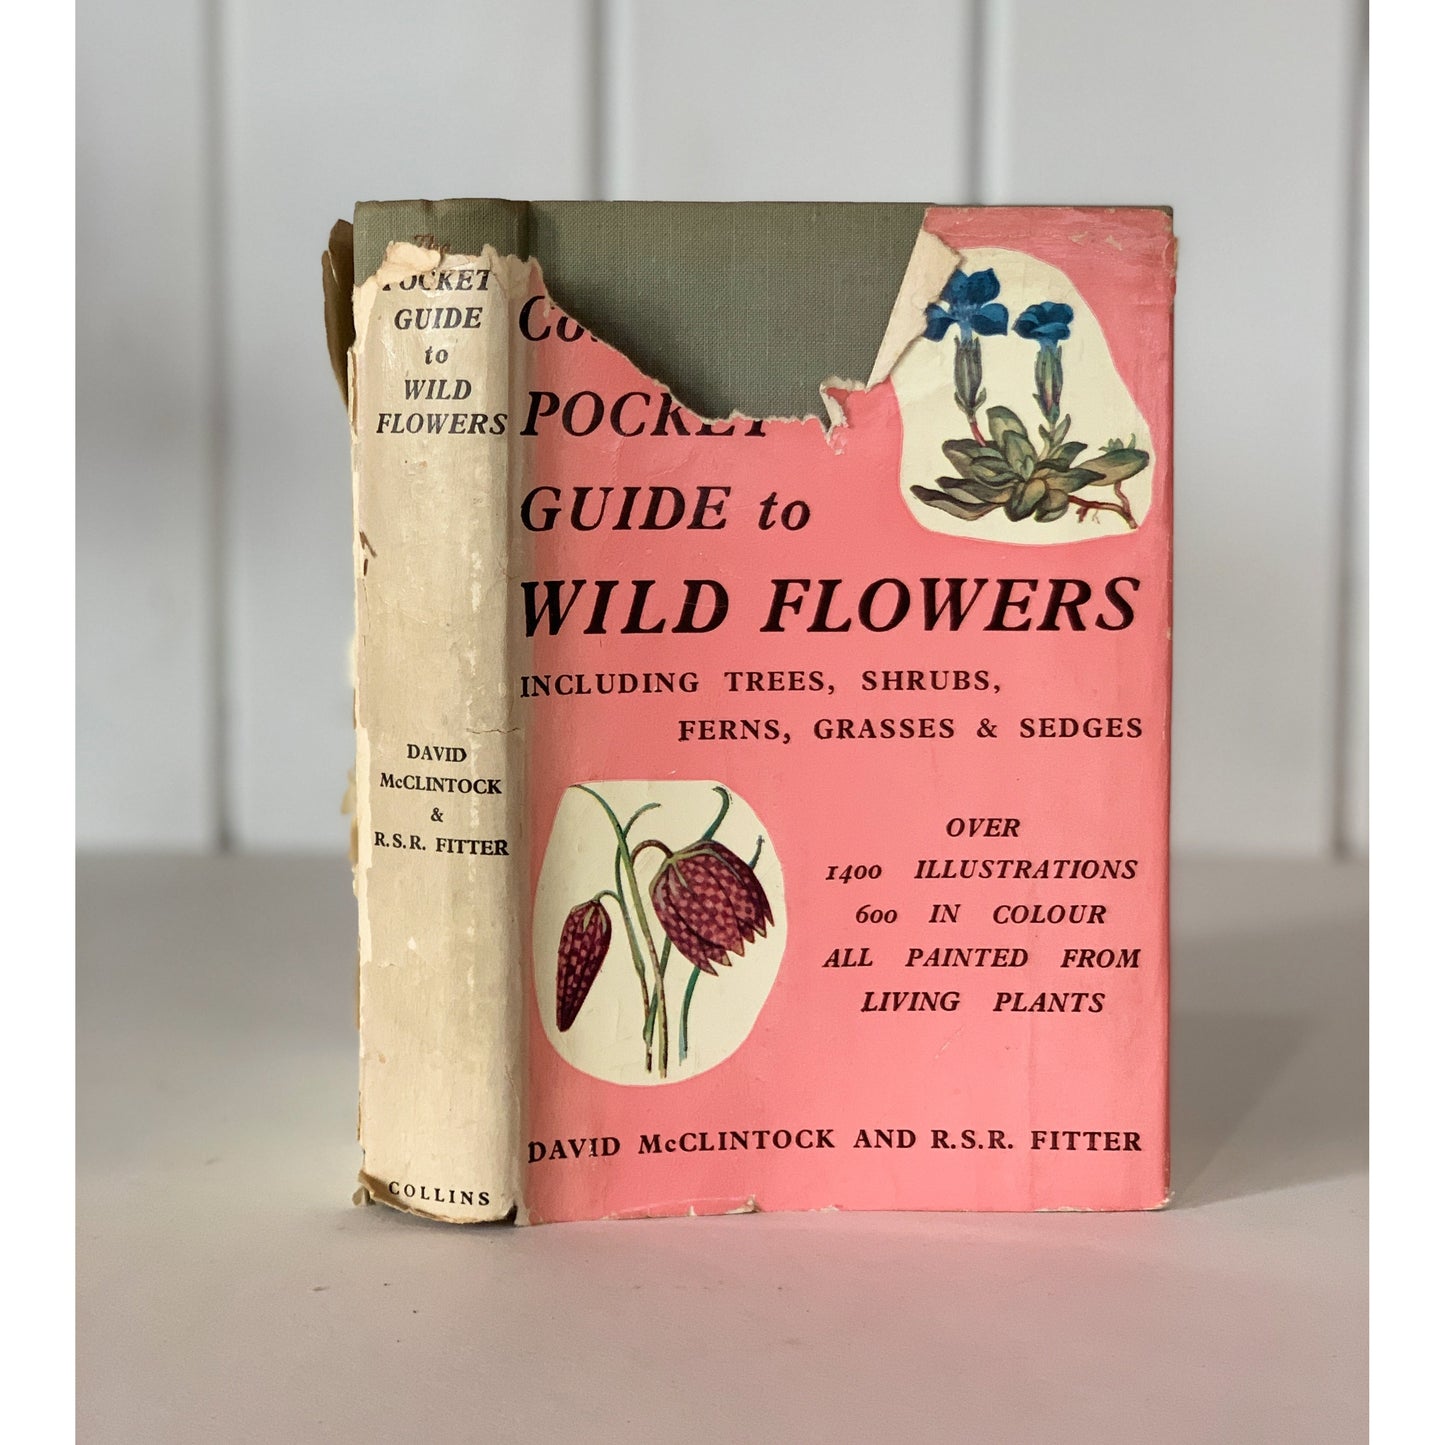 The Pocket Guide to Wild Flowers, 1961 British Field Guide, Illustrated